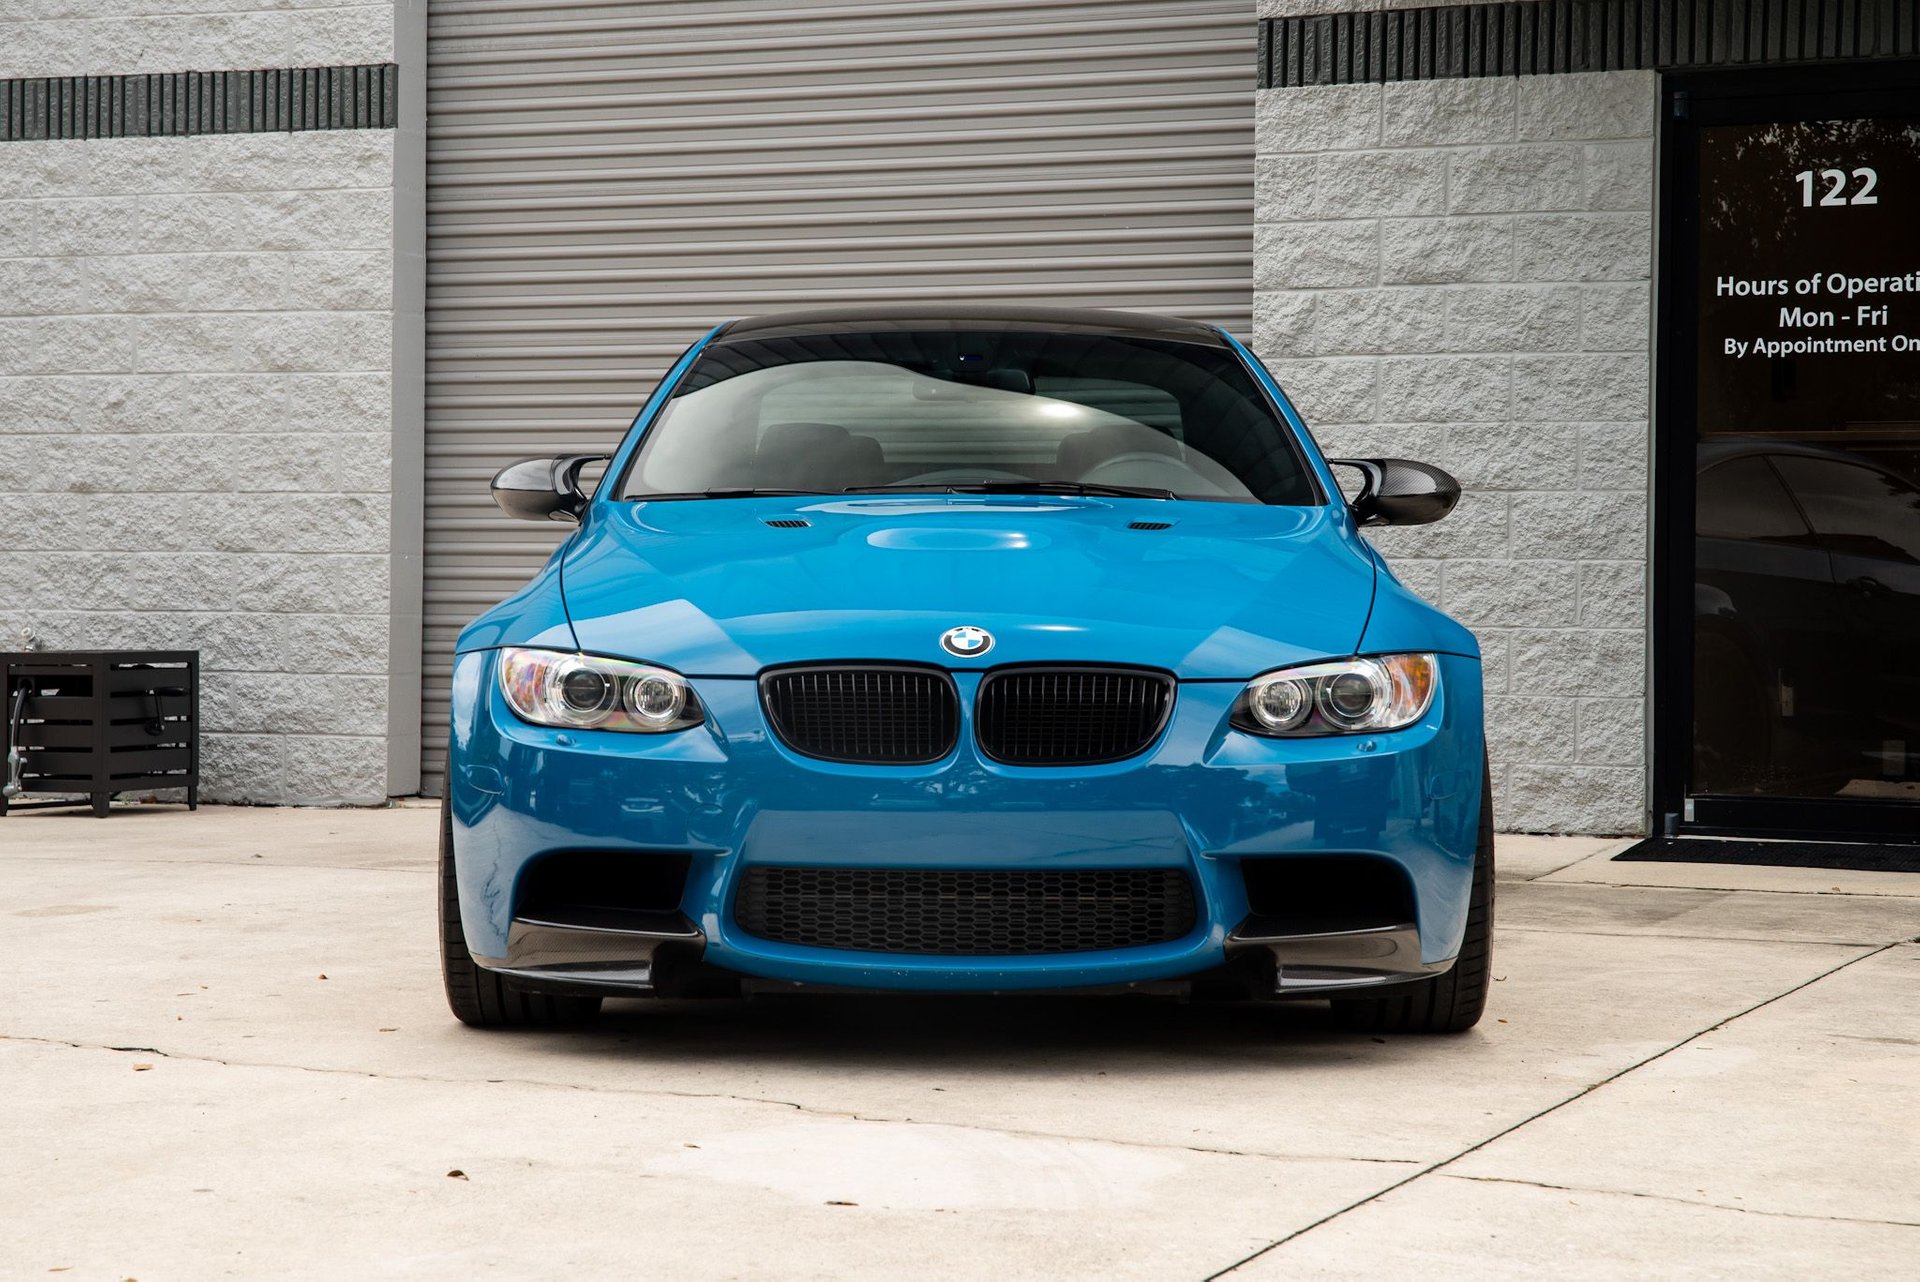 For Sale 2013 BMW M3